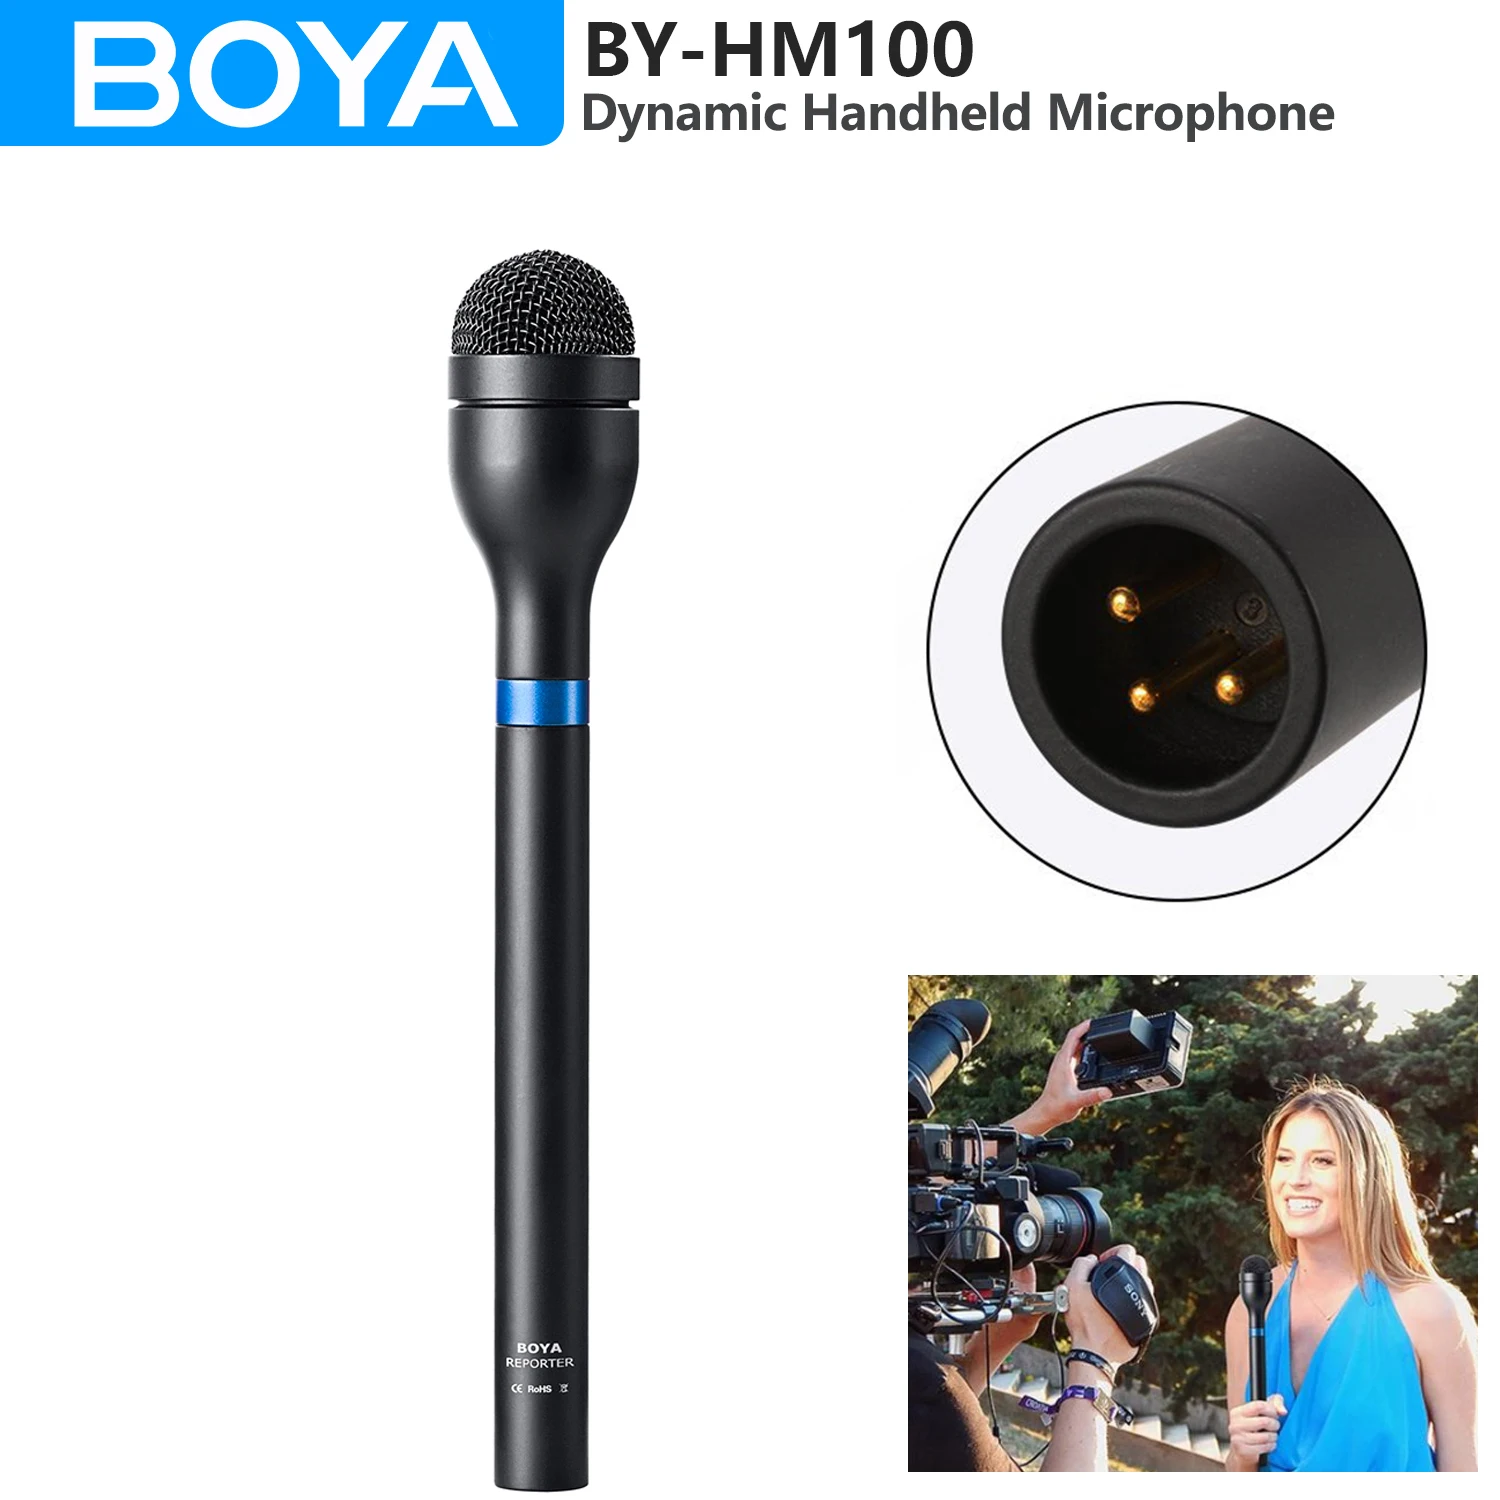 BOYA BY-HM100 Dynamic Handheld Microphone for XLR Devices Wireless  Microphone Interviews ENG Speech Streaming Youtube Recording